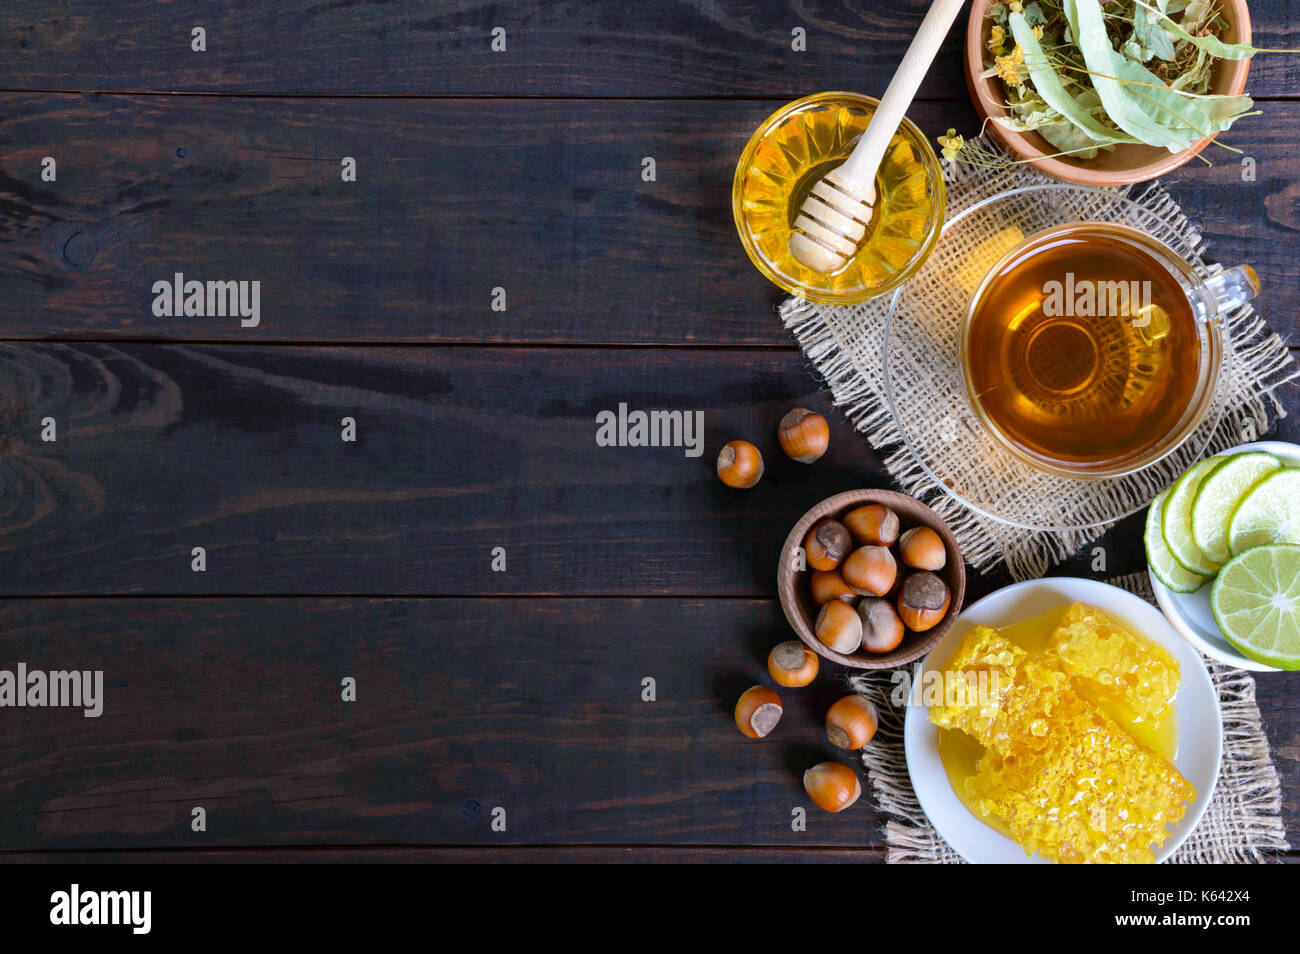 A cup of herbal tea, honey, honeycomb, hazelnuts on a dark wooden background. Healthy foods. Proper nutrition. Stock Photo